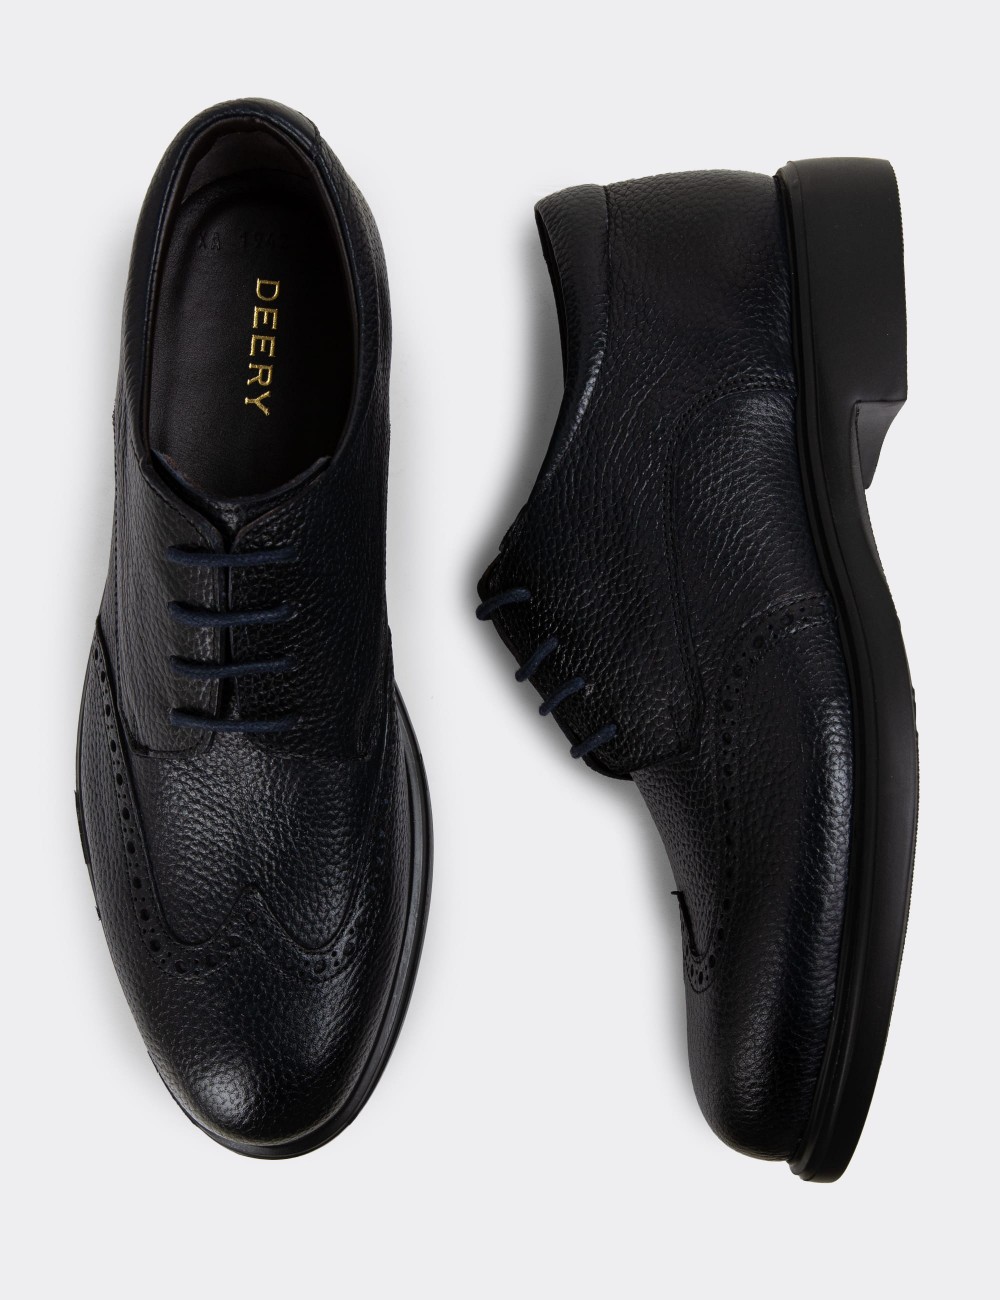 Navy Leather Lace-up Shoes - 01942MLCVE01